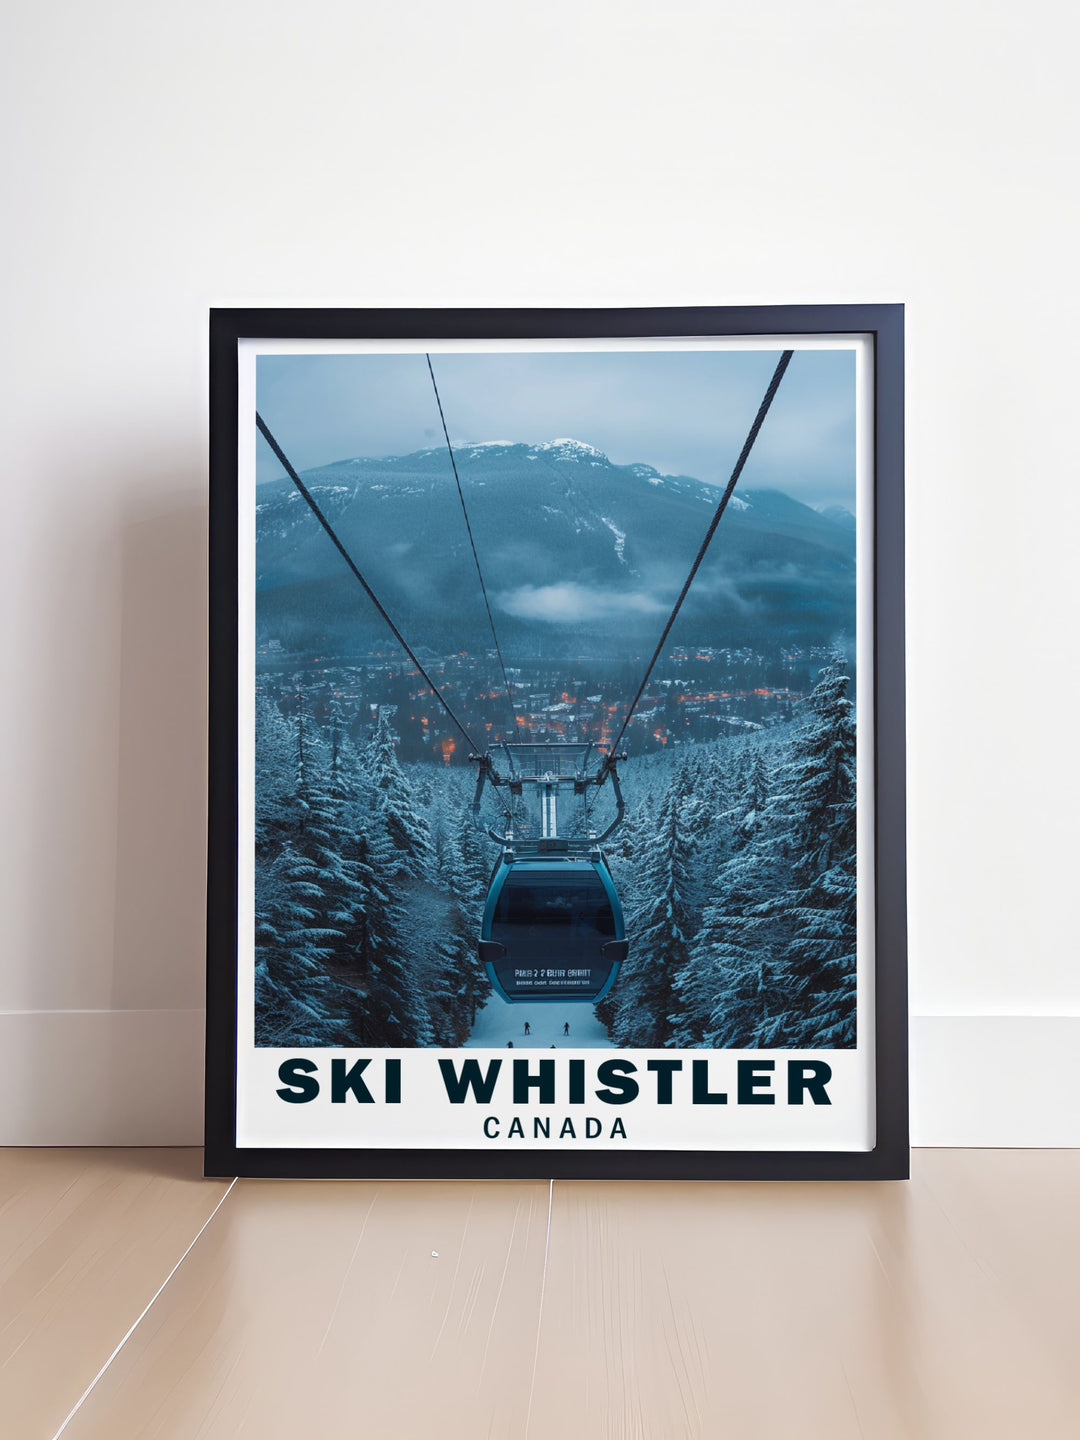 This travel poster showcases the majestic Peak 2 Peak Gondola in Whistler, offering a stunning perspective of the snow covered peaks and lush valleys, ideal for those who love high altitude adventures.